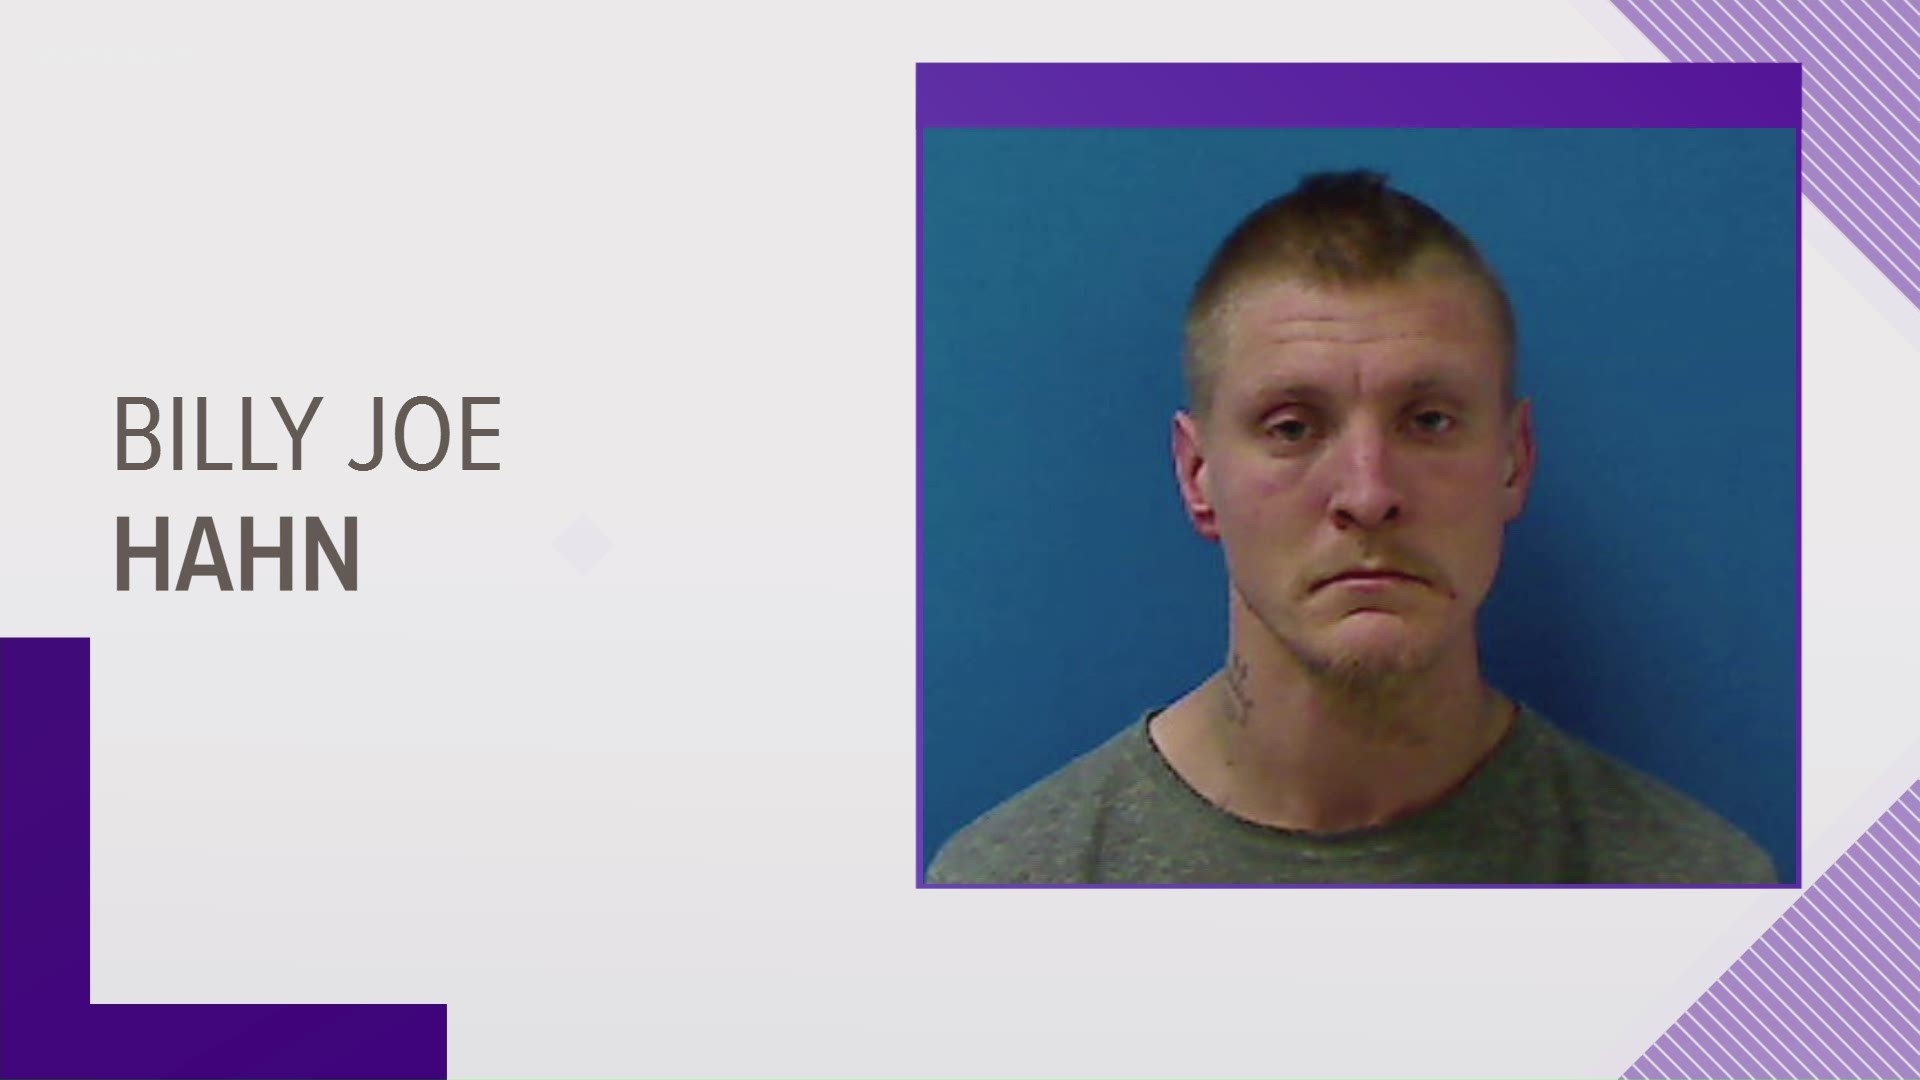 A murder suspect has been arrested in Hickory after he barricaded himself in a home, the Catawba County Sheriff’s Office reports.